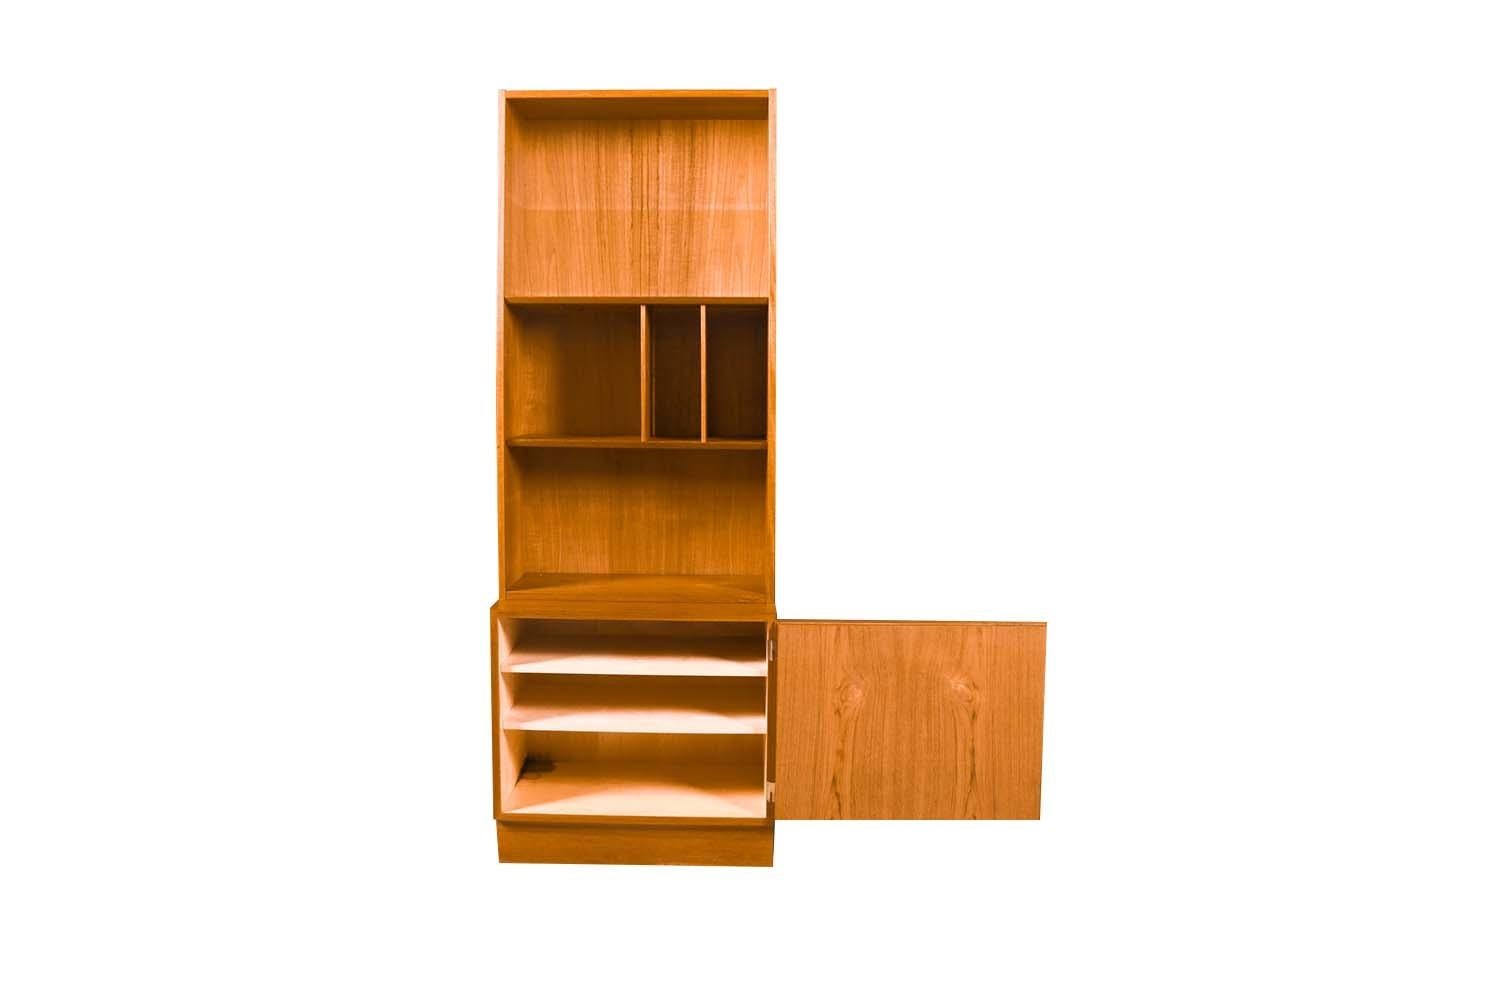 Fantastic Danish teak storage cabinet/ hutch by designer Poul Hundevad. This amazing vintage teak veneer storage cabinet/hutch features a large open and divided storage cavity above a locking closed storage cabinet with key, resting on a modern